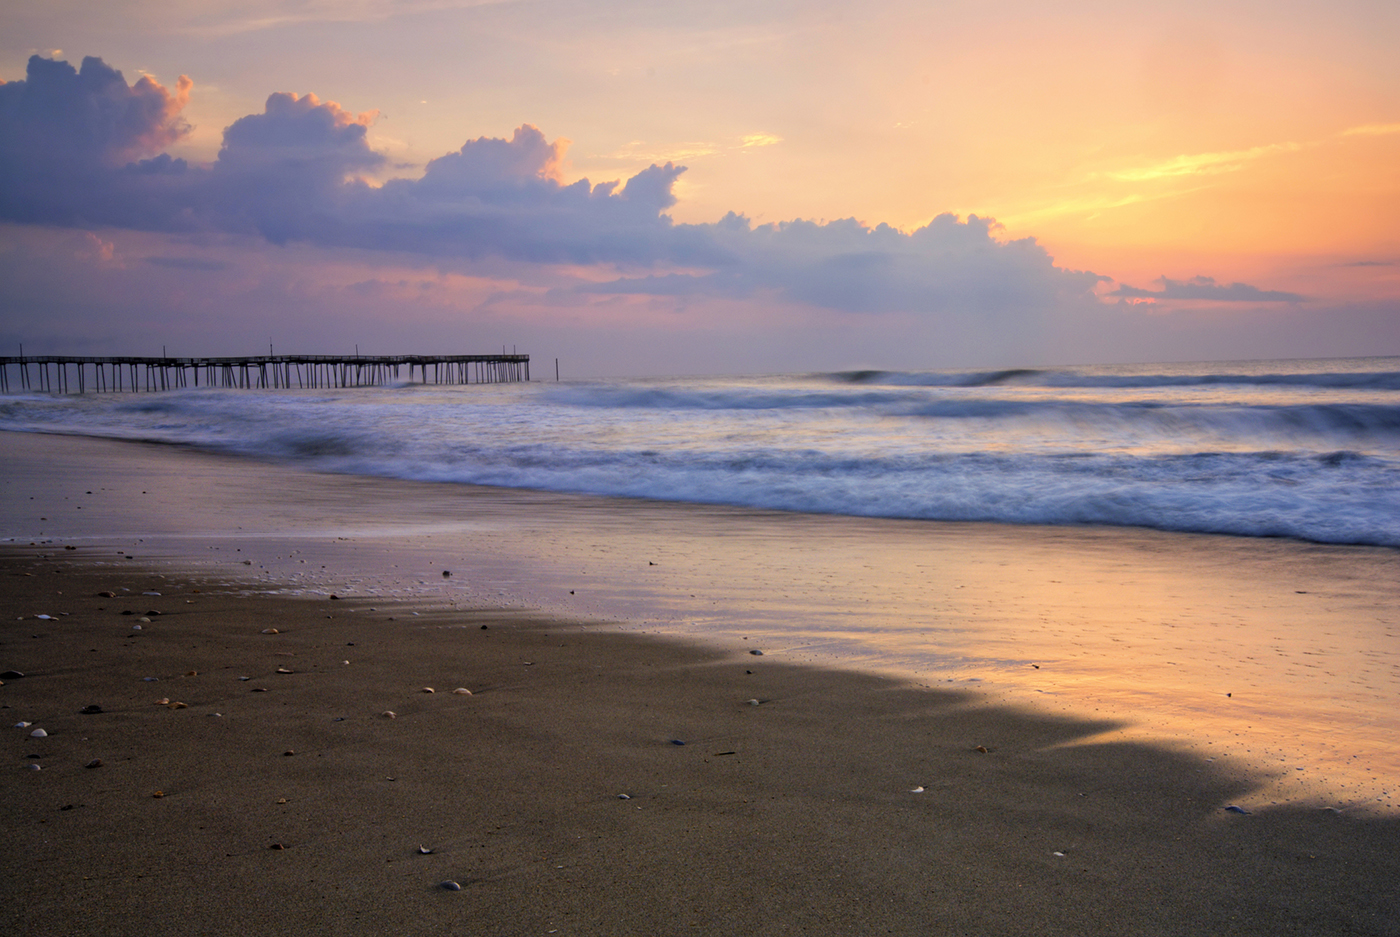 Sunrise at fishing pier on the Outer Banks, North Carolina